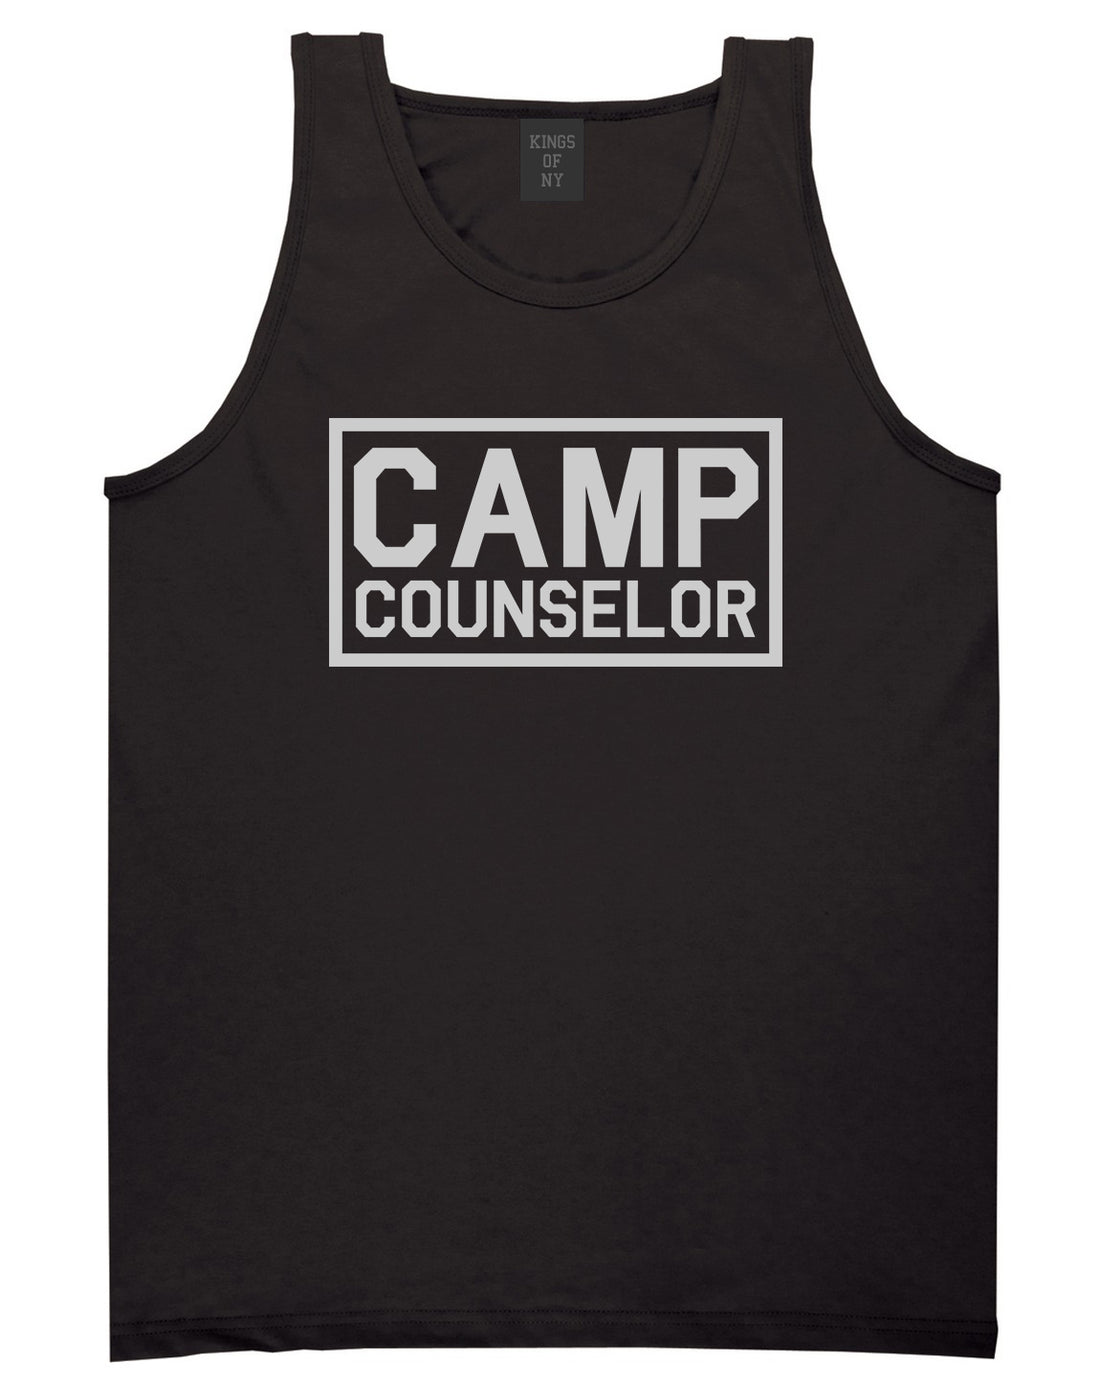 Camp Counselor Black Tank Top Shirt by Kings Of NY